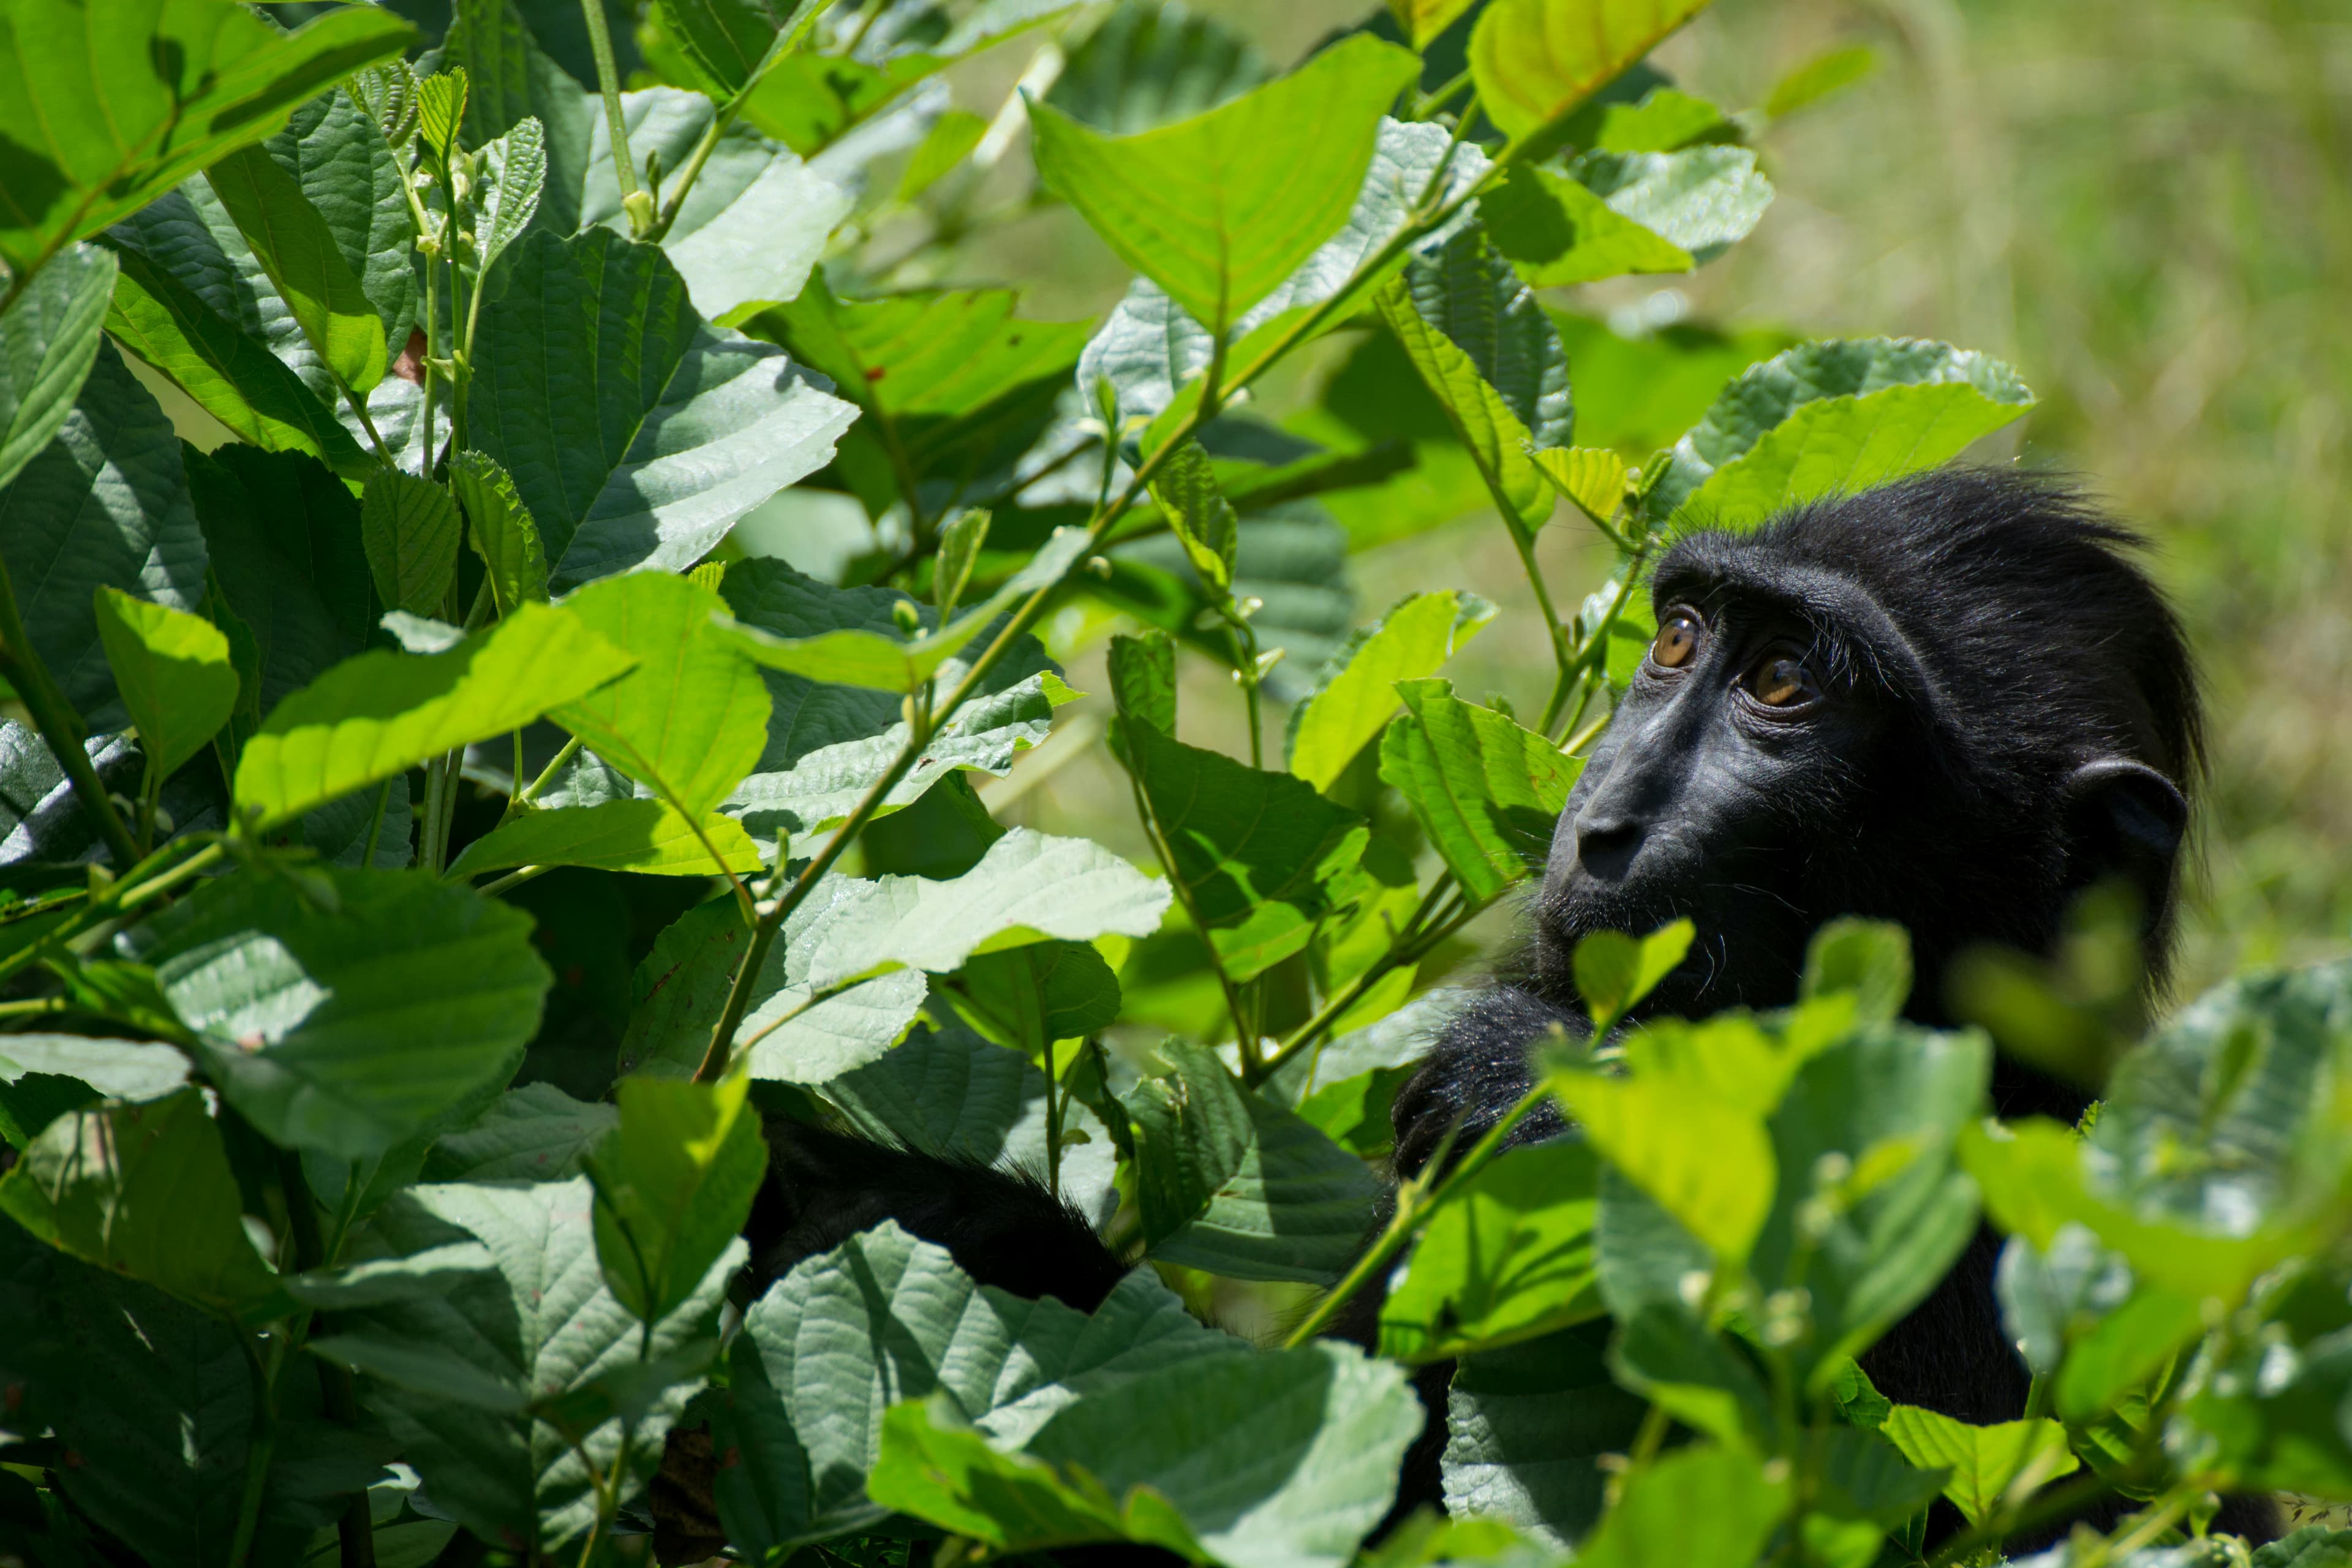 A young gorilla hides curiously behind green leaves.